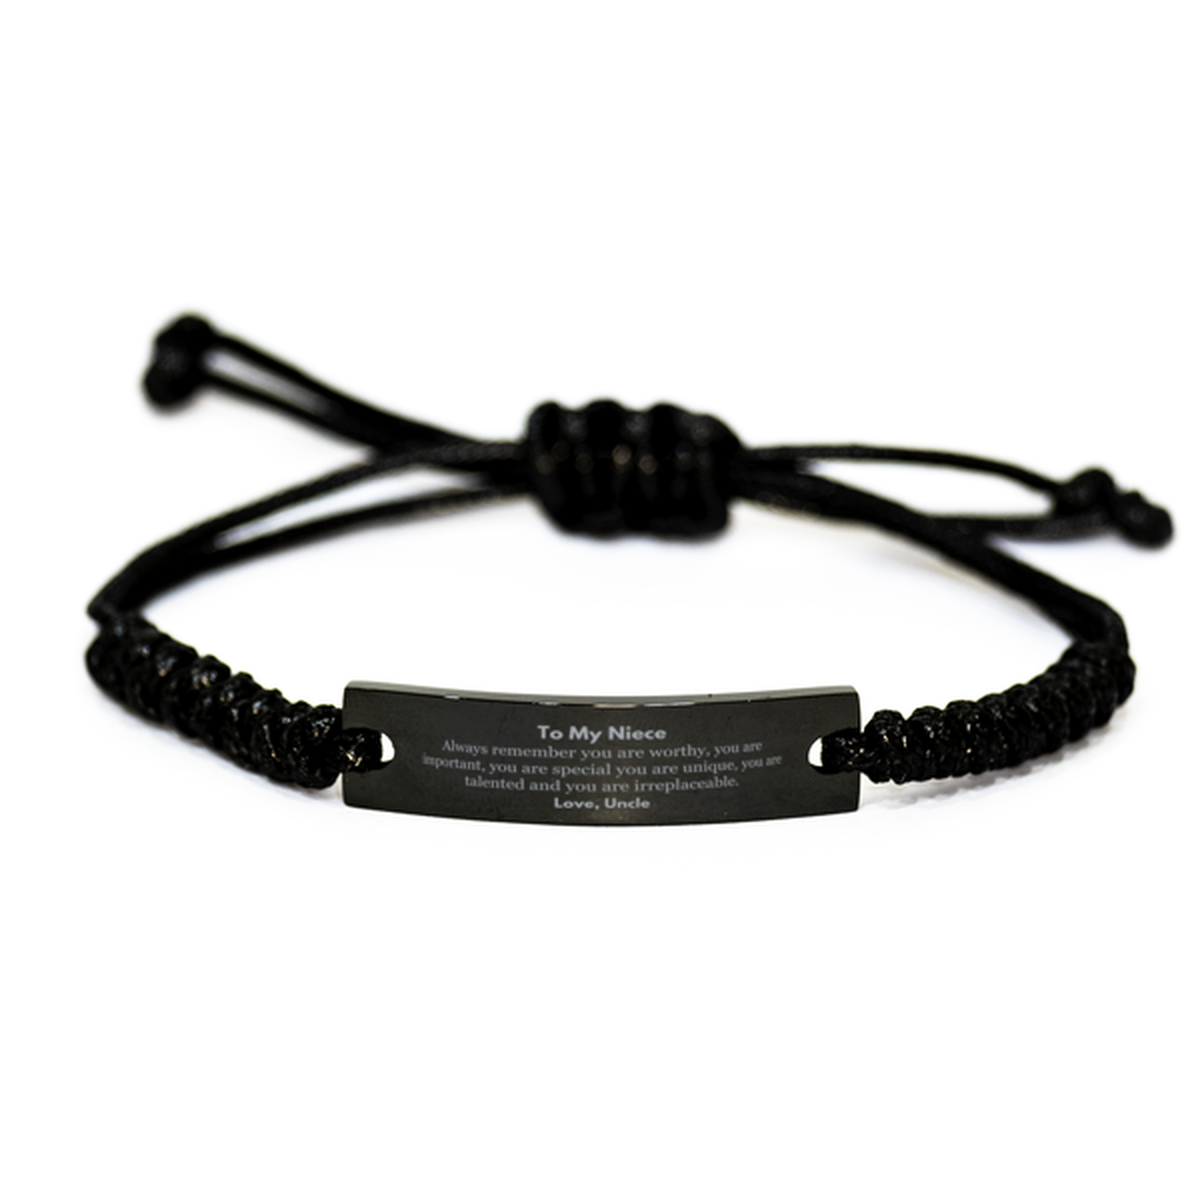 Niece Birthday Gifts from Uncle, Inspirational Black Rope Bracelet for Niece Christmas Graduation Gifts for Niece Always remember you are worthy, you are important. Love, Uncle